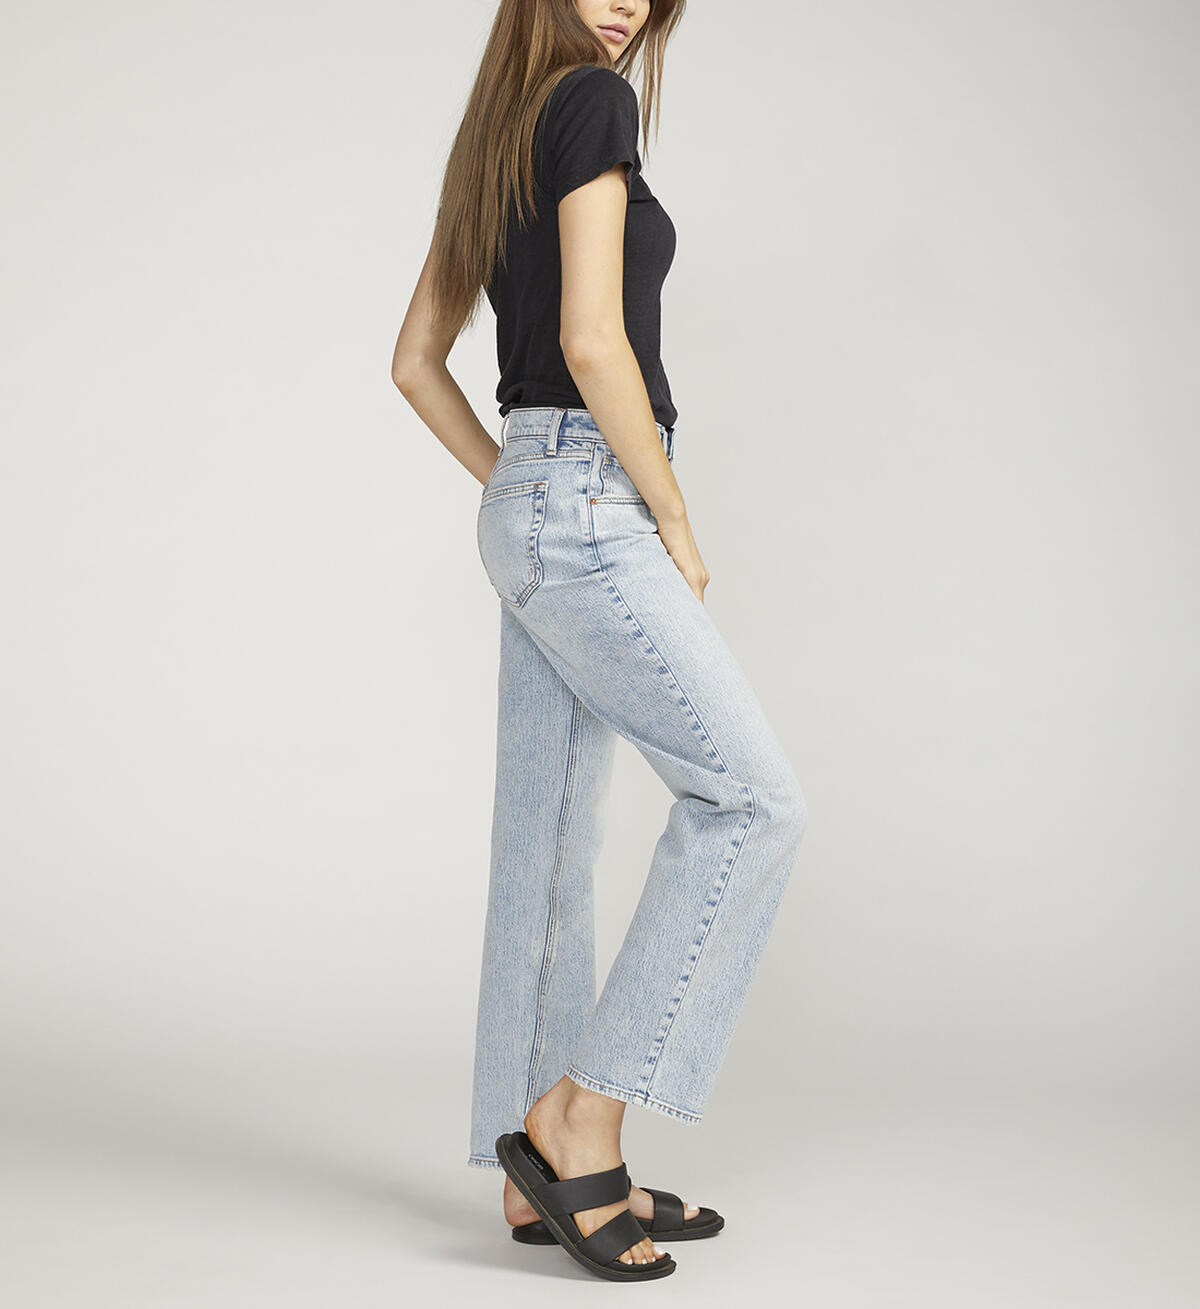 Low 5 Mid Rise Straight Leg Jeans, , hi-res image number 2